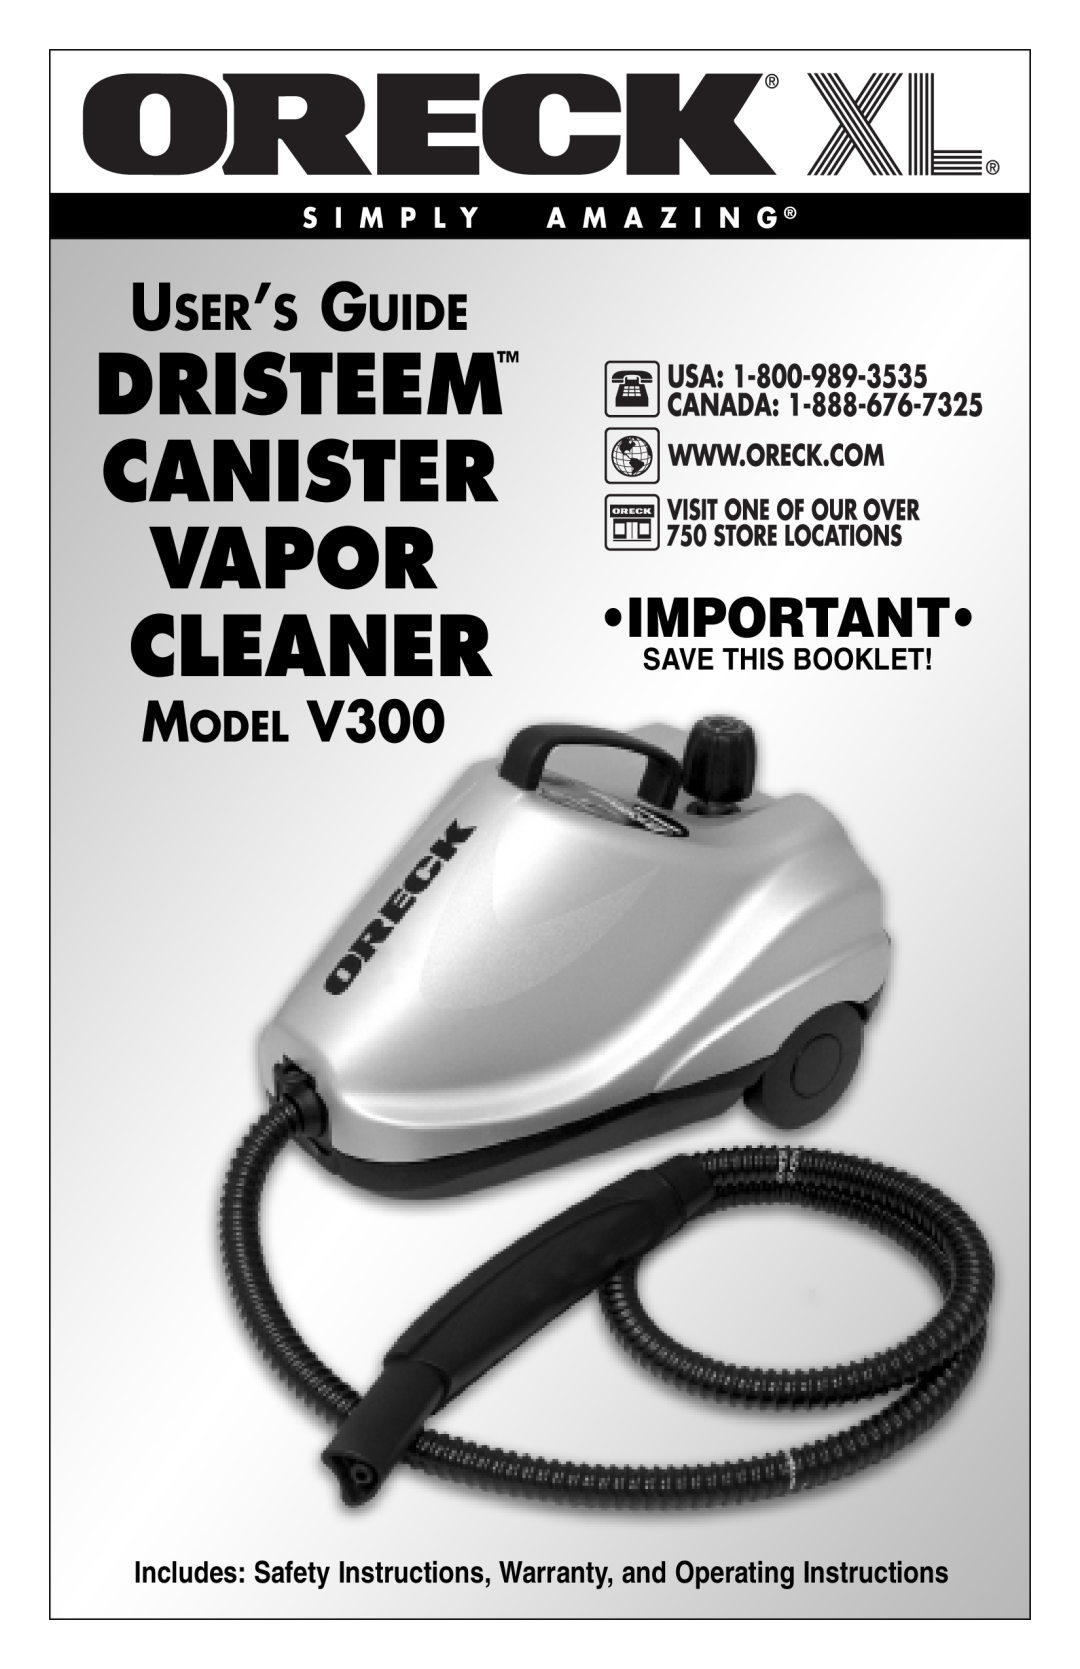 Oreck USER'S GUIDE warranty Save This Booklet, Dristeem Canister Vapor, Cleaner Important, Model, User’S Guide 